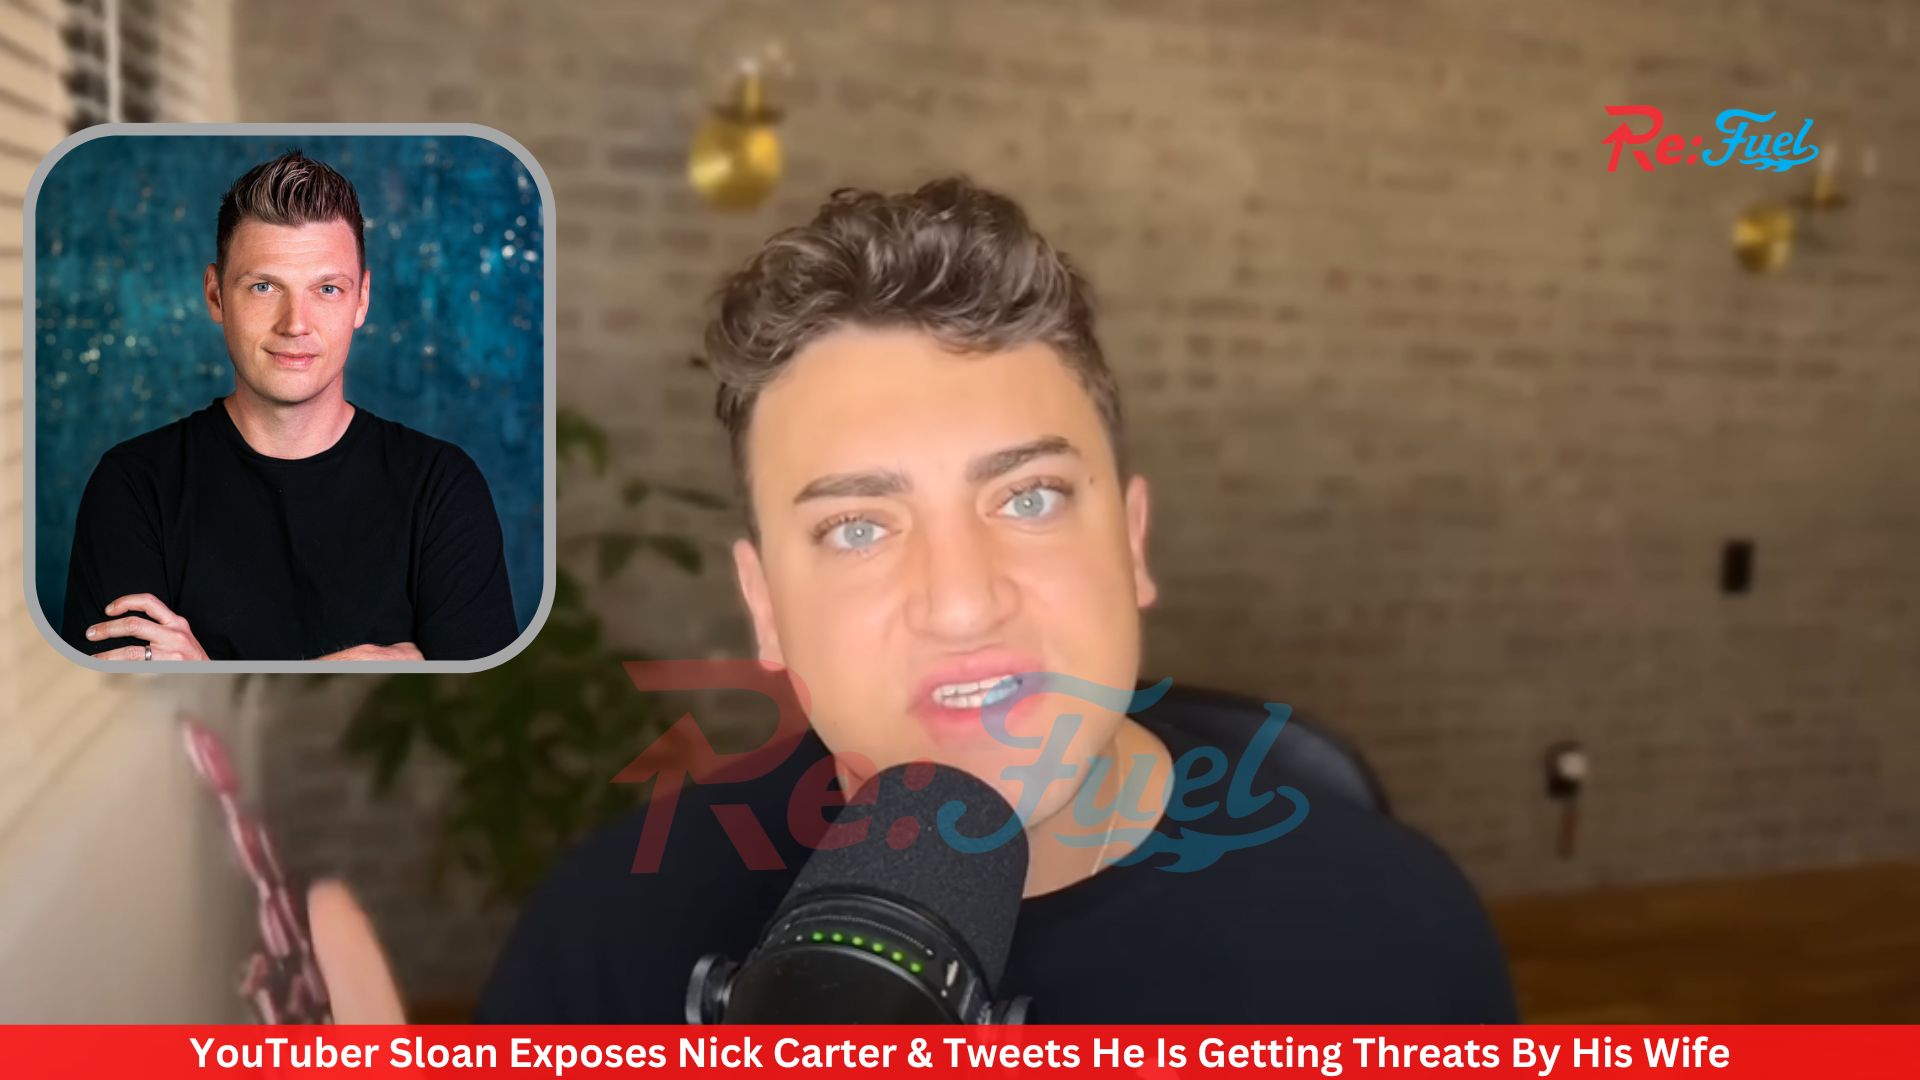 YouTuber Sloan Exposes Nick Carter & Tweets He Is Getting Threats By His Wife